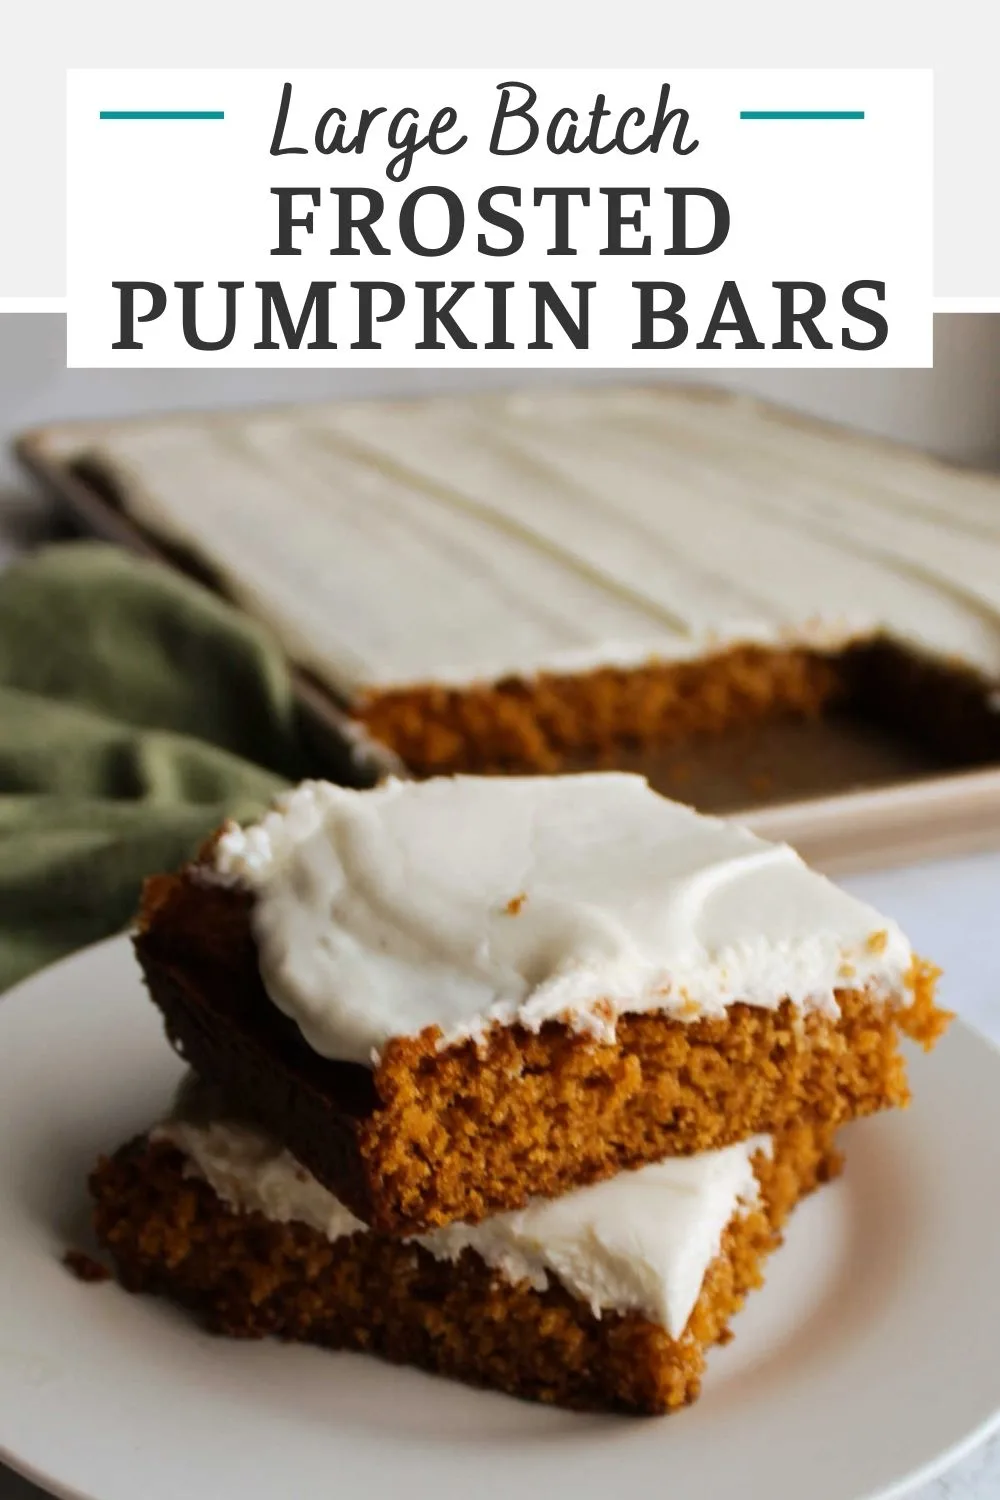 Soft and simple pumpkin bars topped with cream cheese frosting, you may also know them as pumpkin squares.  No matter what you call them, they are good and a must make for fall. This sheet pan sized recipe is perfect for parties, family gatherings and more.  